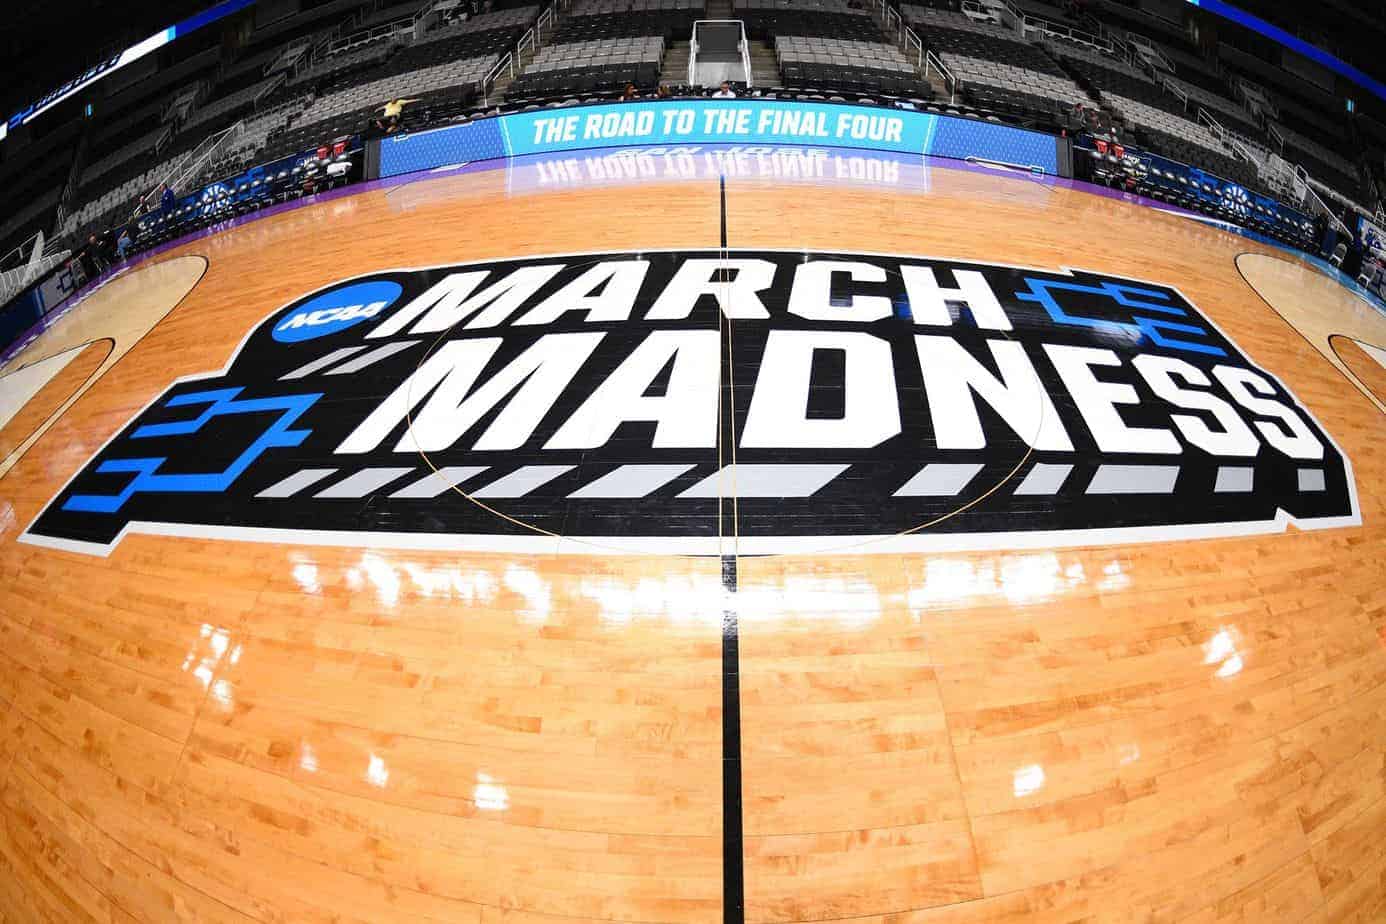 Texas Southern vs Michigan NCAA Tournament March Madness prediction and odds. 3/20